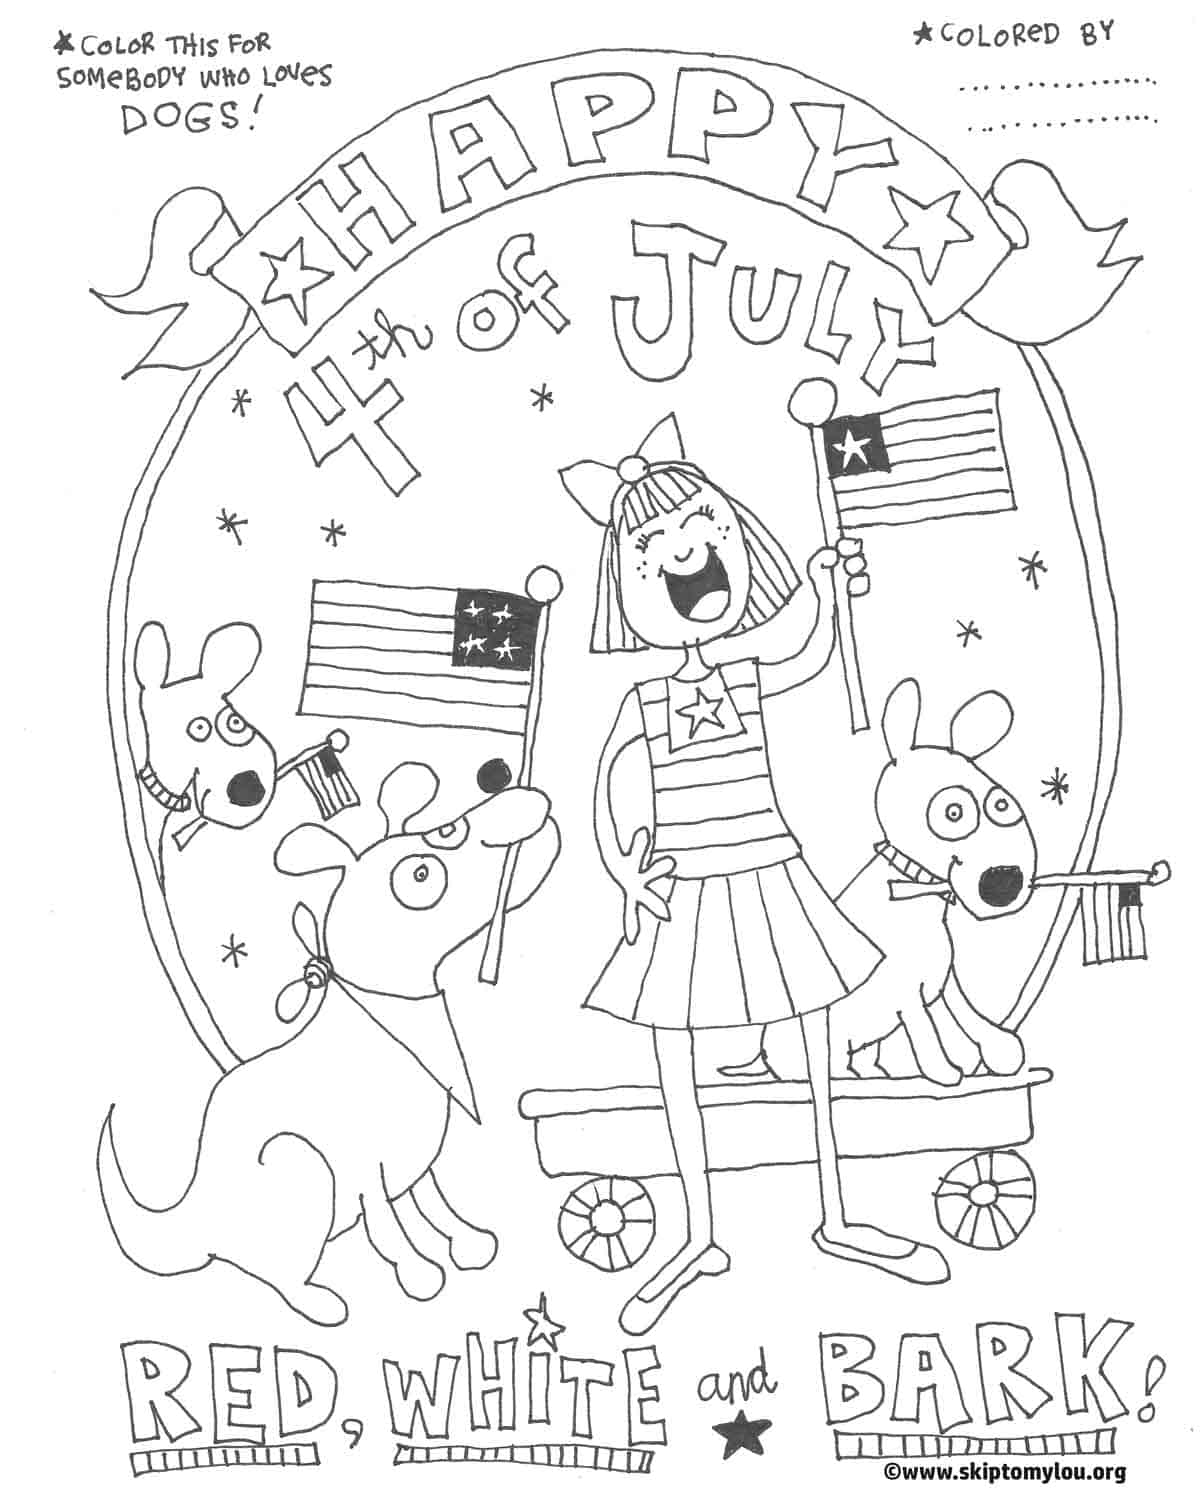 Celebrate Freedom with 4th of July: 180+ Free Coloring Pages 95